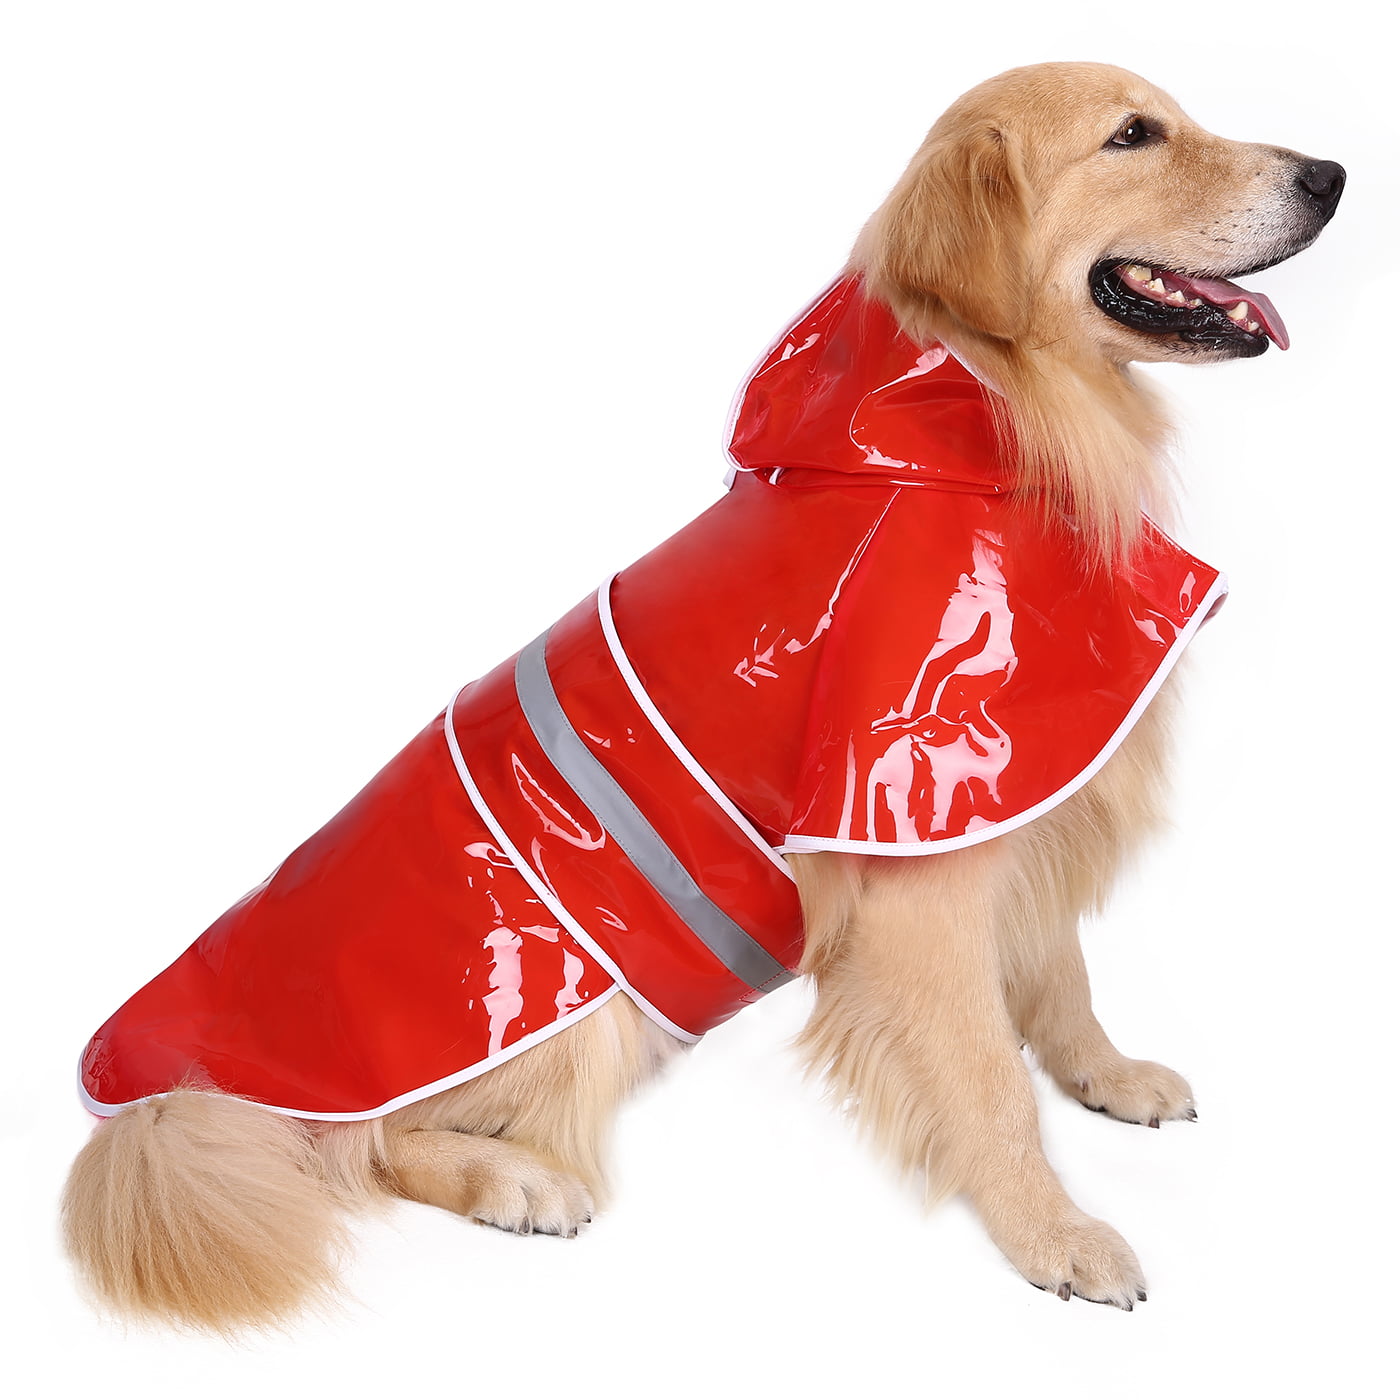 Idepet Dog Raincoat with Hood Pet Dog Waterproof Coat Adjustable Lightweight Outdoor Rain Poncho Rain Gear Jumpsuit with Harness Hole for Puppy Small Medium Dogs